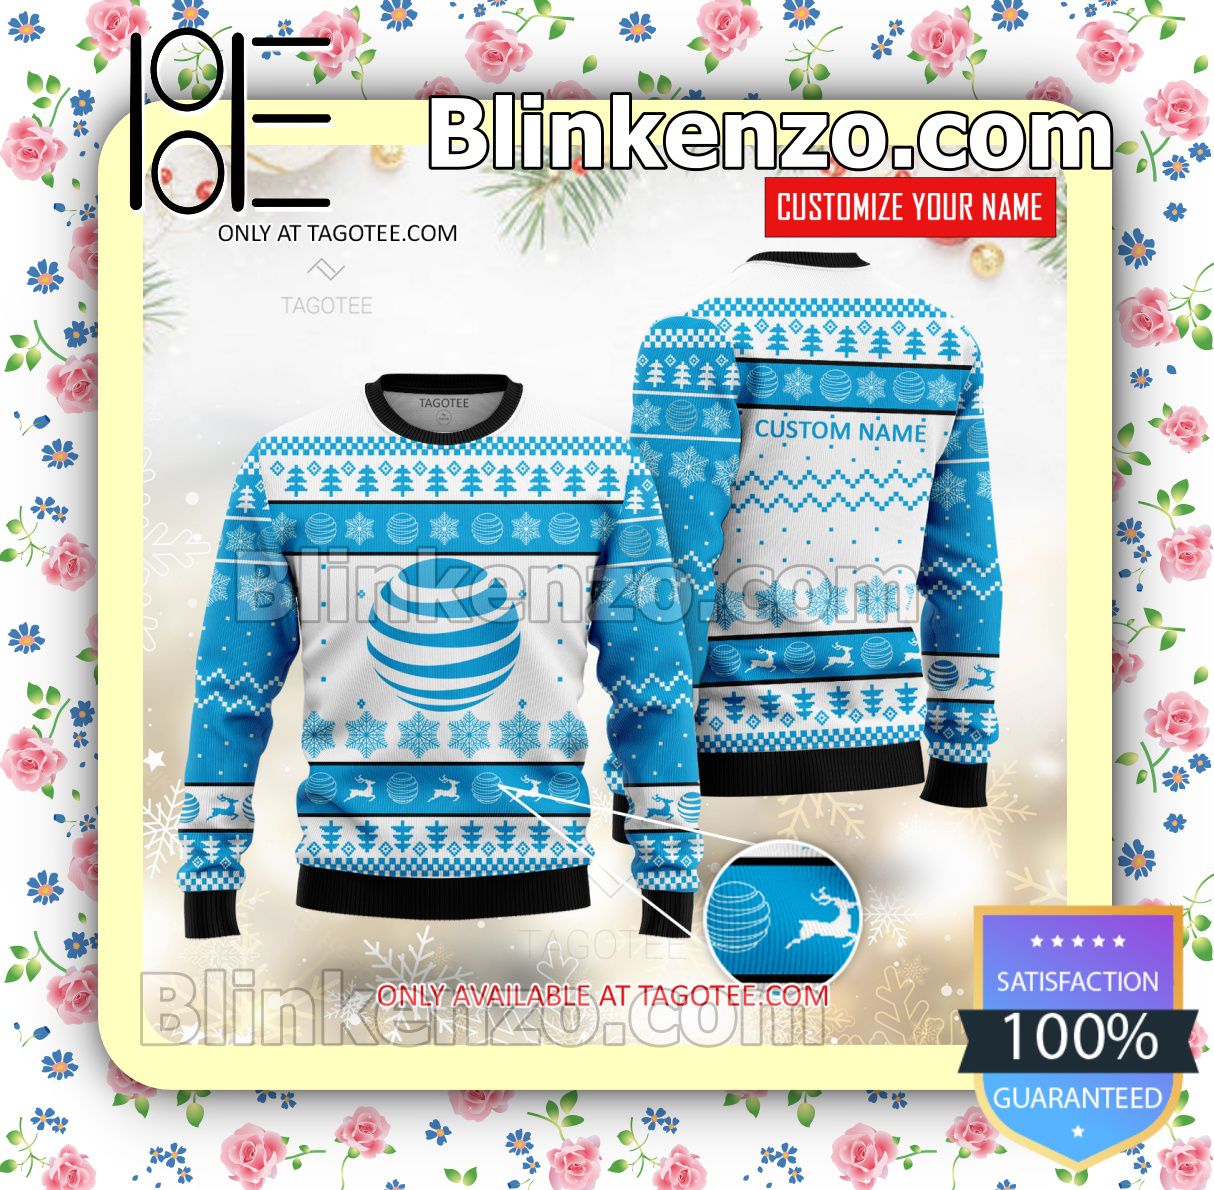 AT&T Brand Print Christmas Sweater